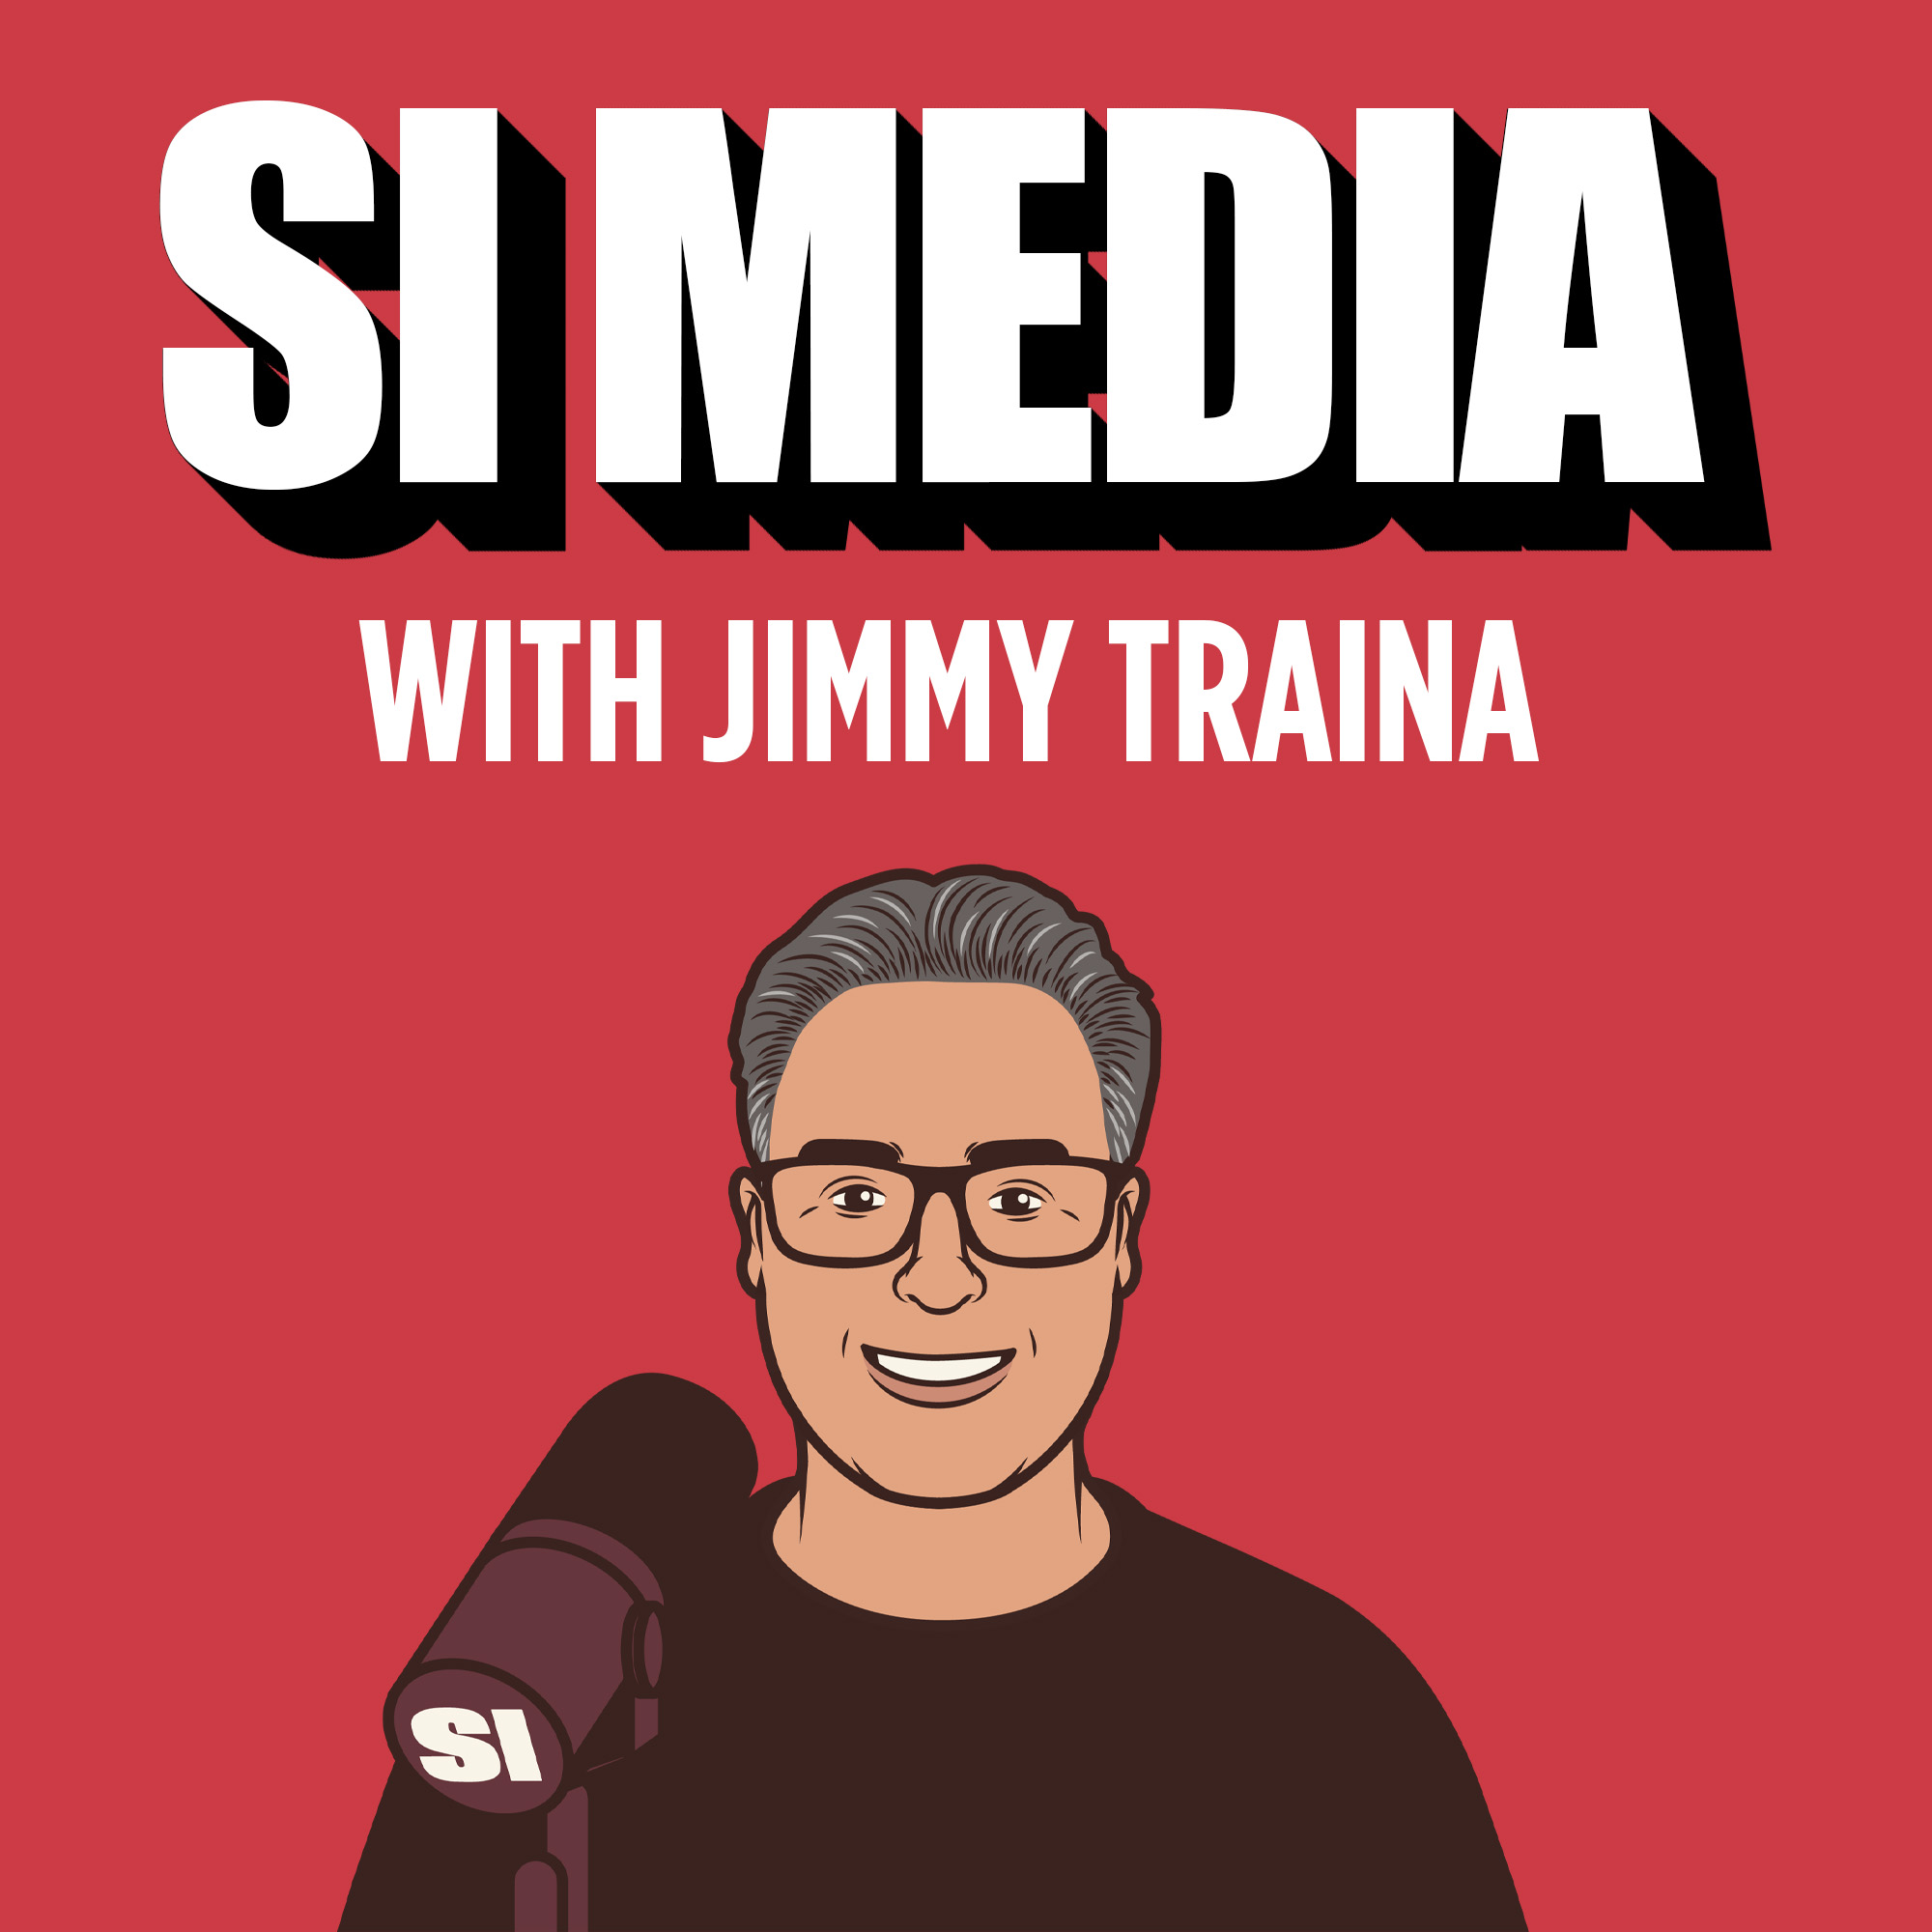 John Sterling + Traina Thoughts